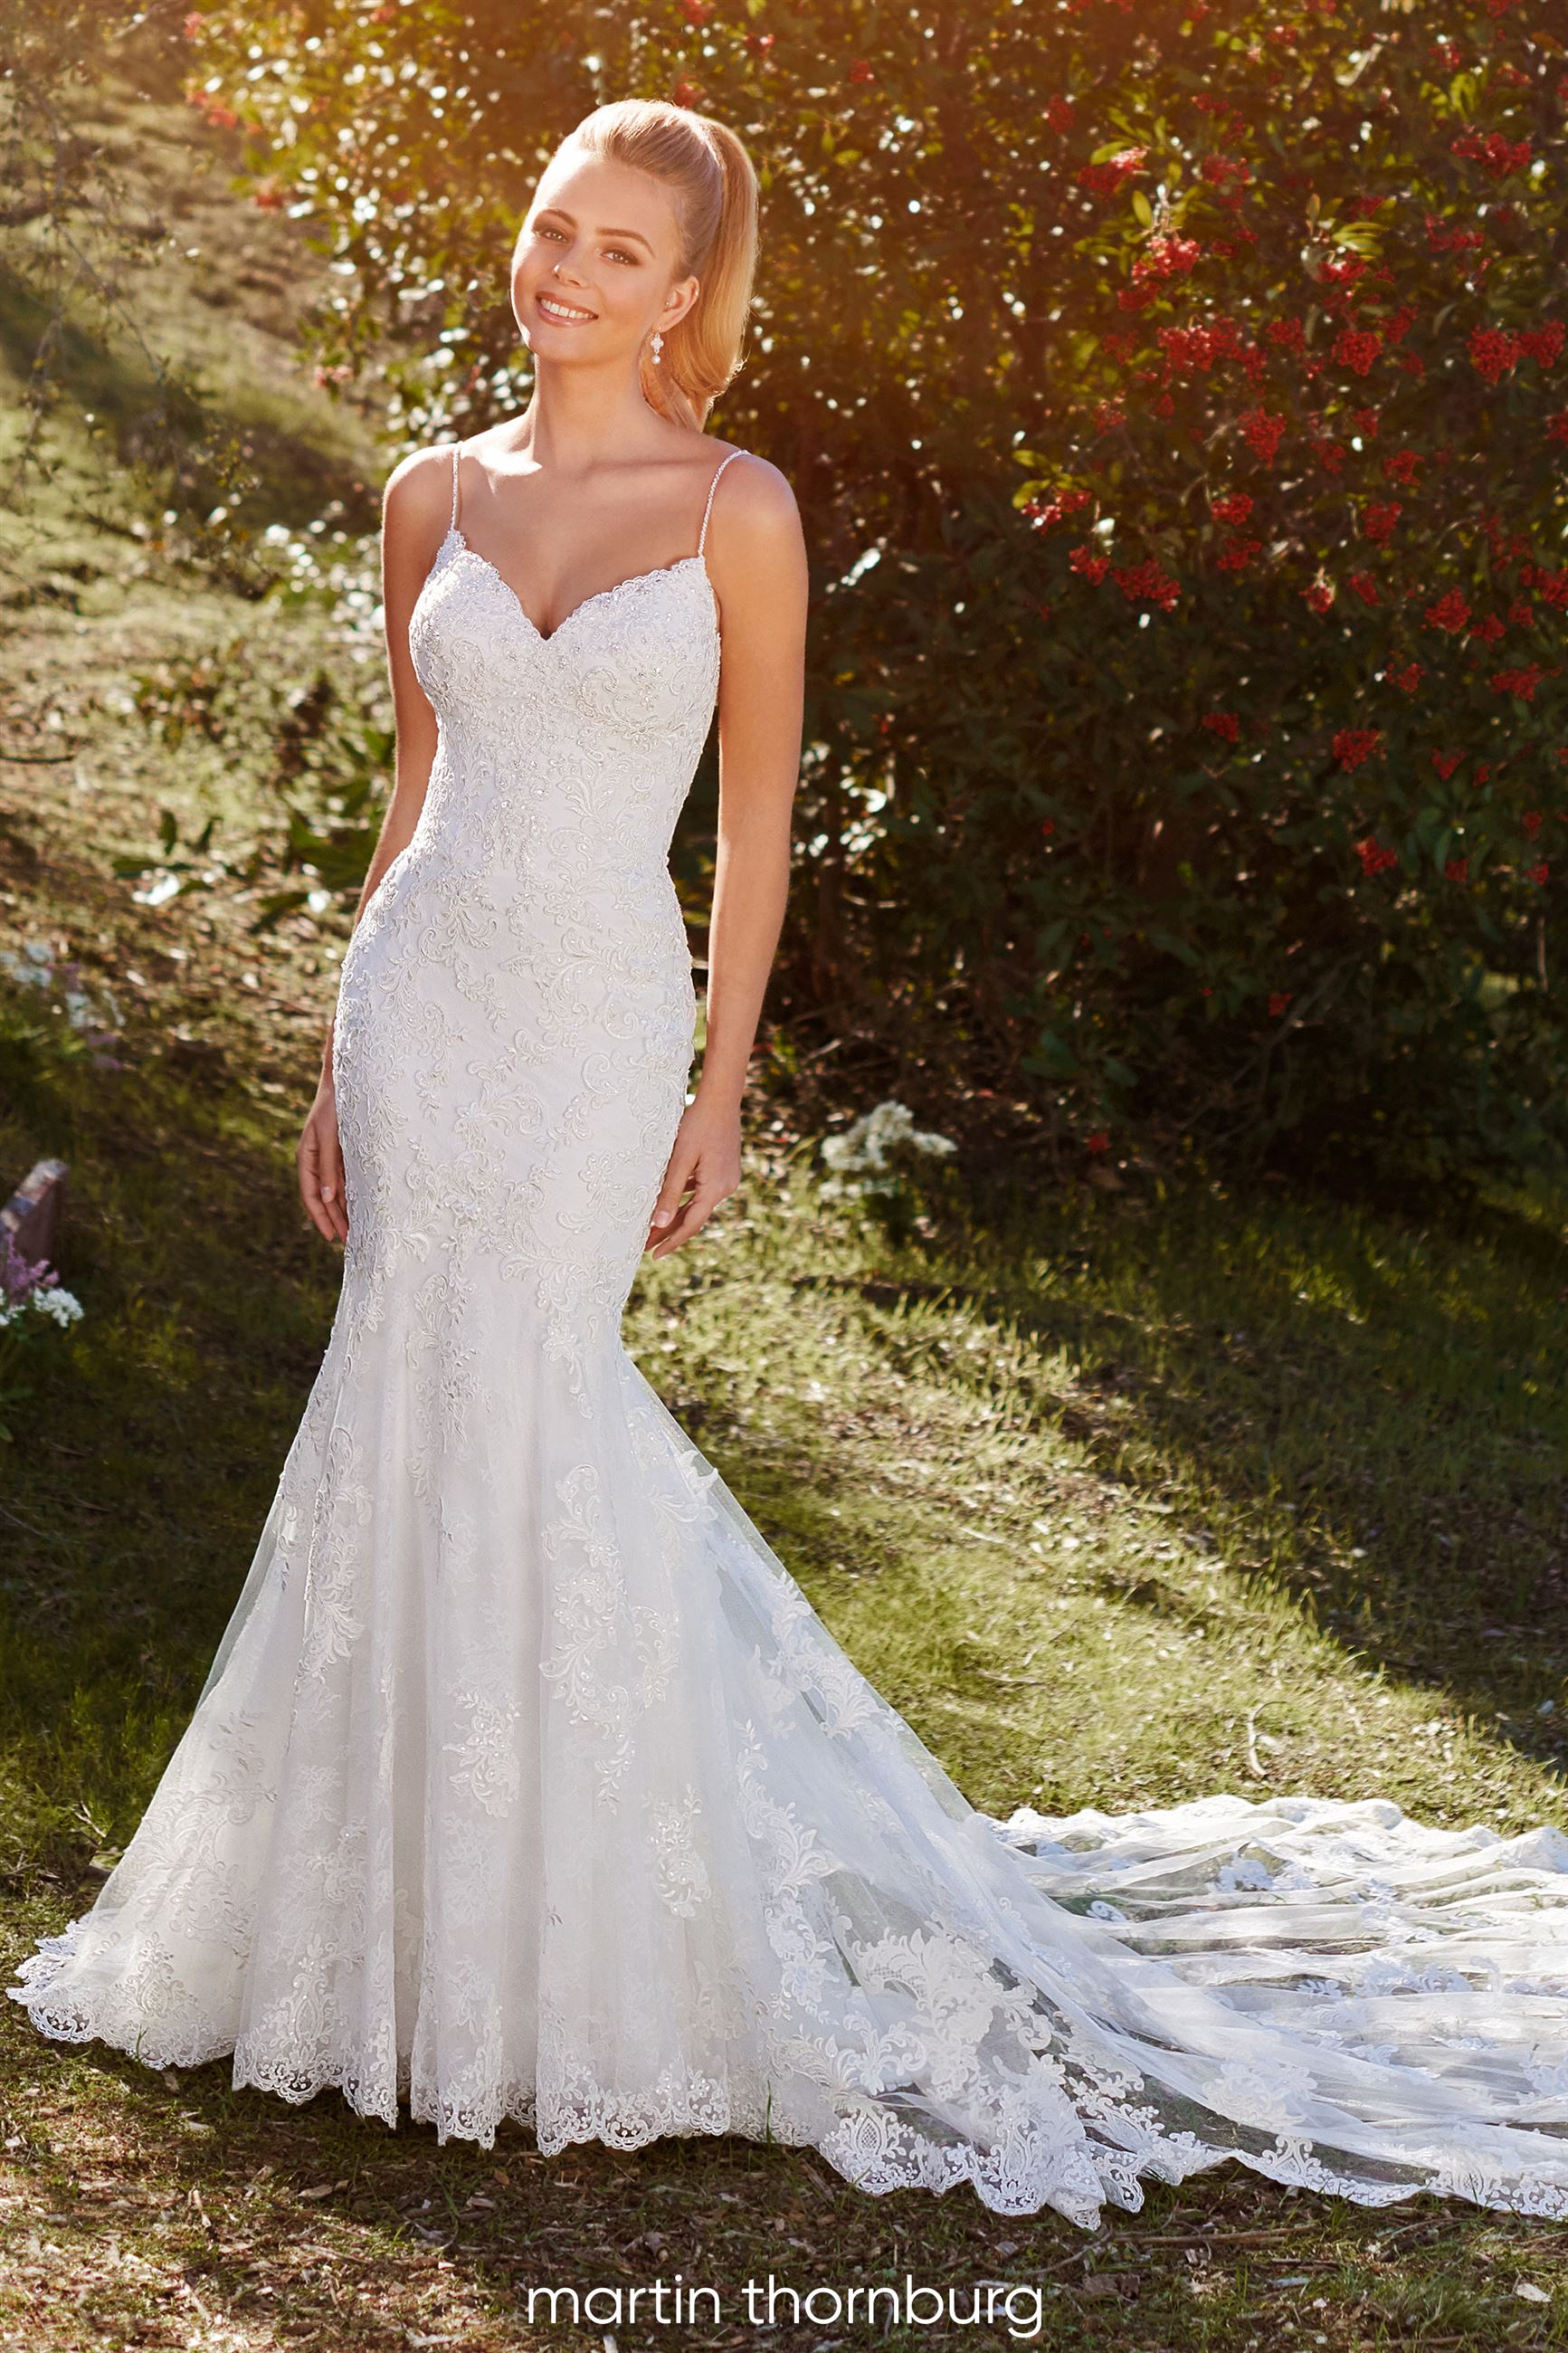 The wedding dress styles guide… for petite brides - Inspiration